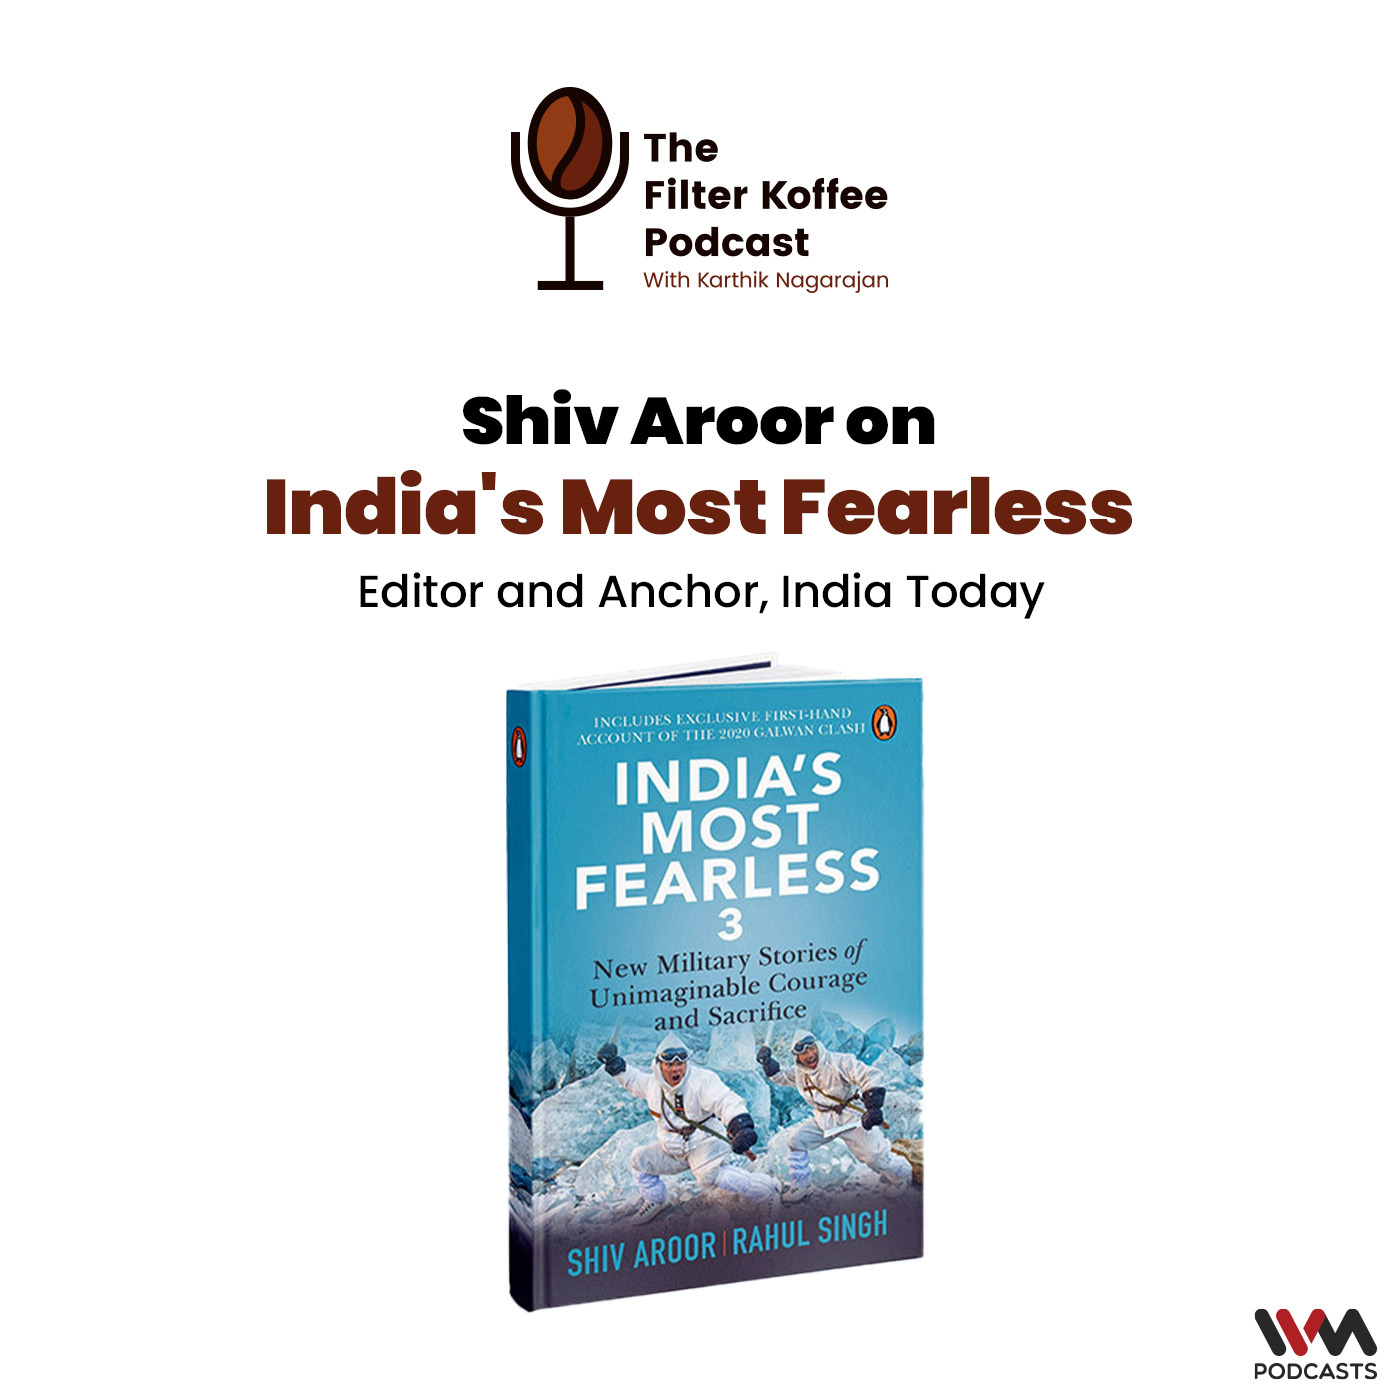 Shiv Aroor on India's Most Fearless